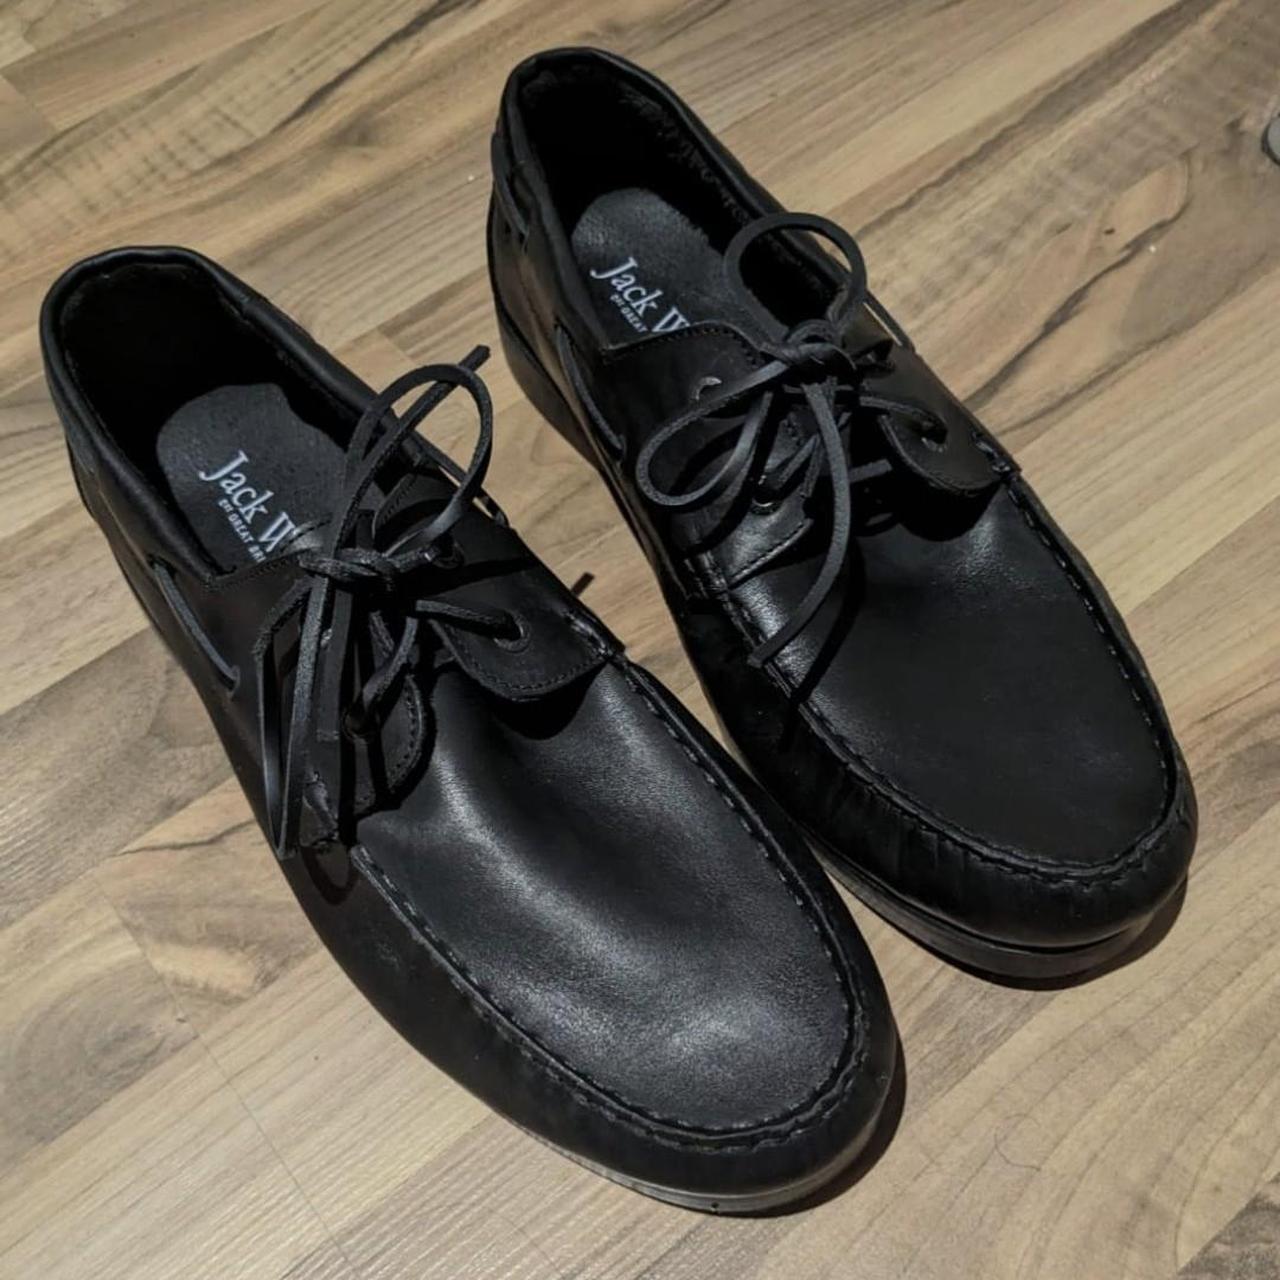 Brand new black leather shoes. A gift to me but in... - Depop